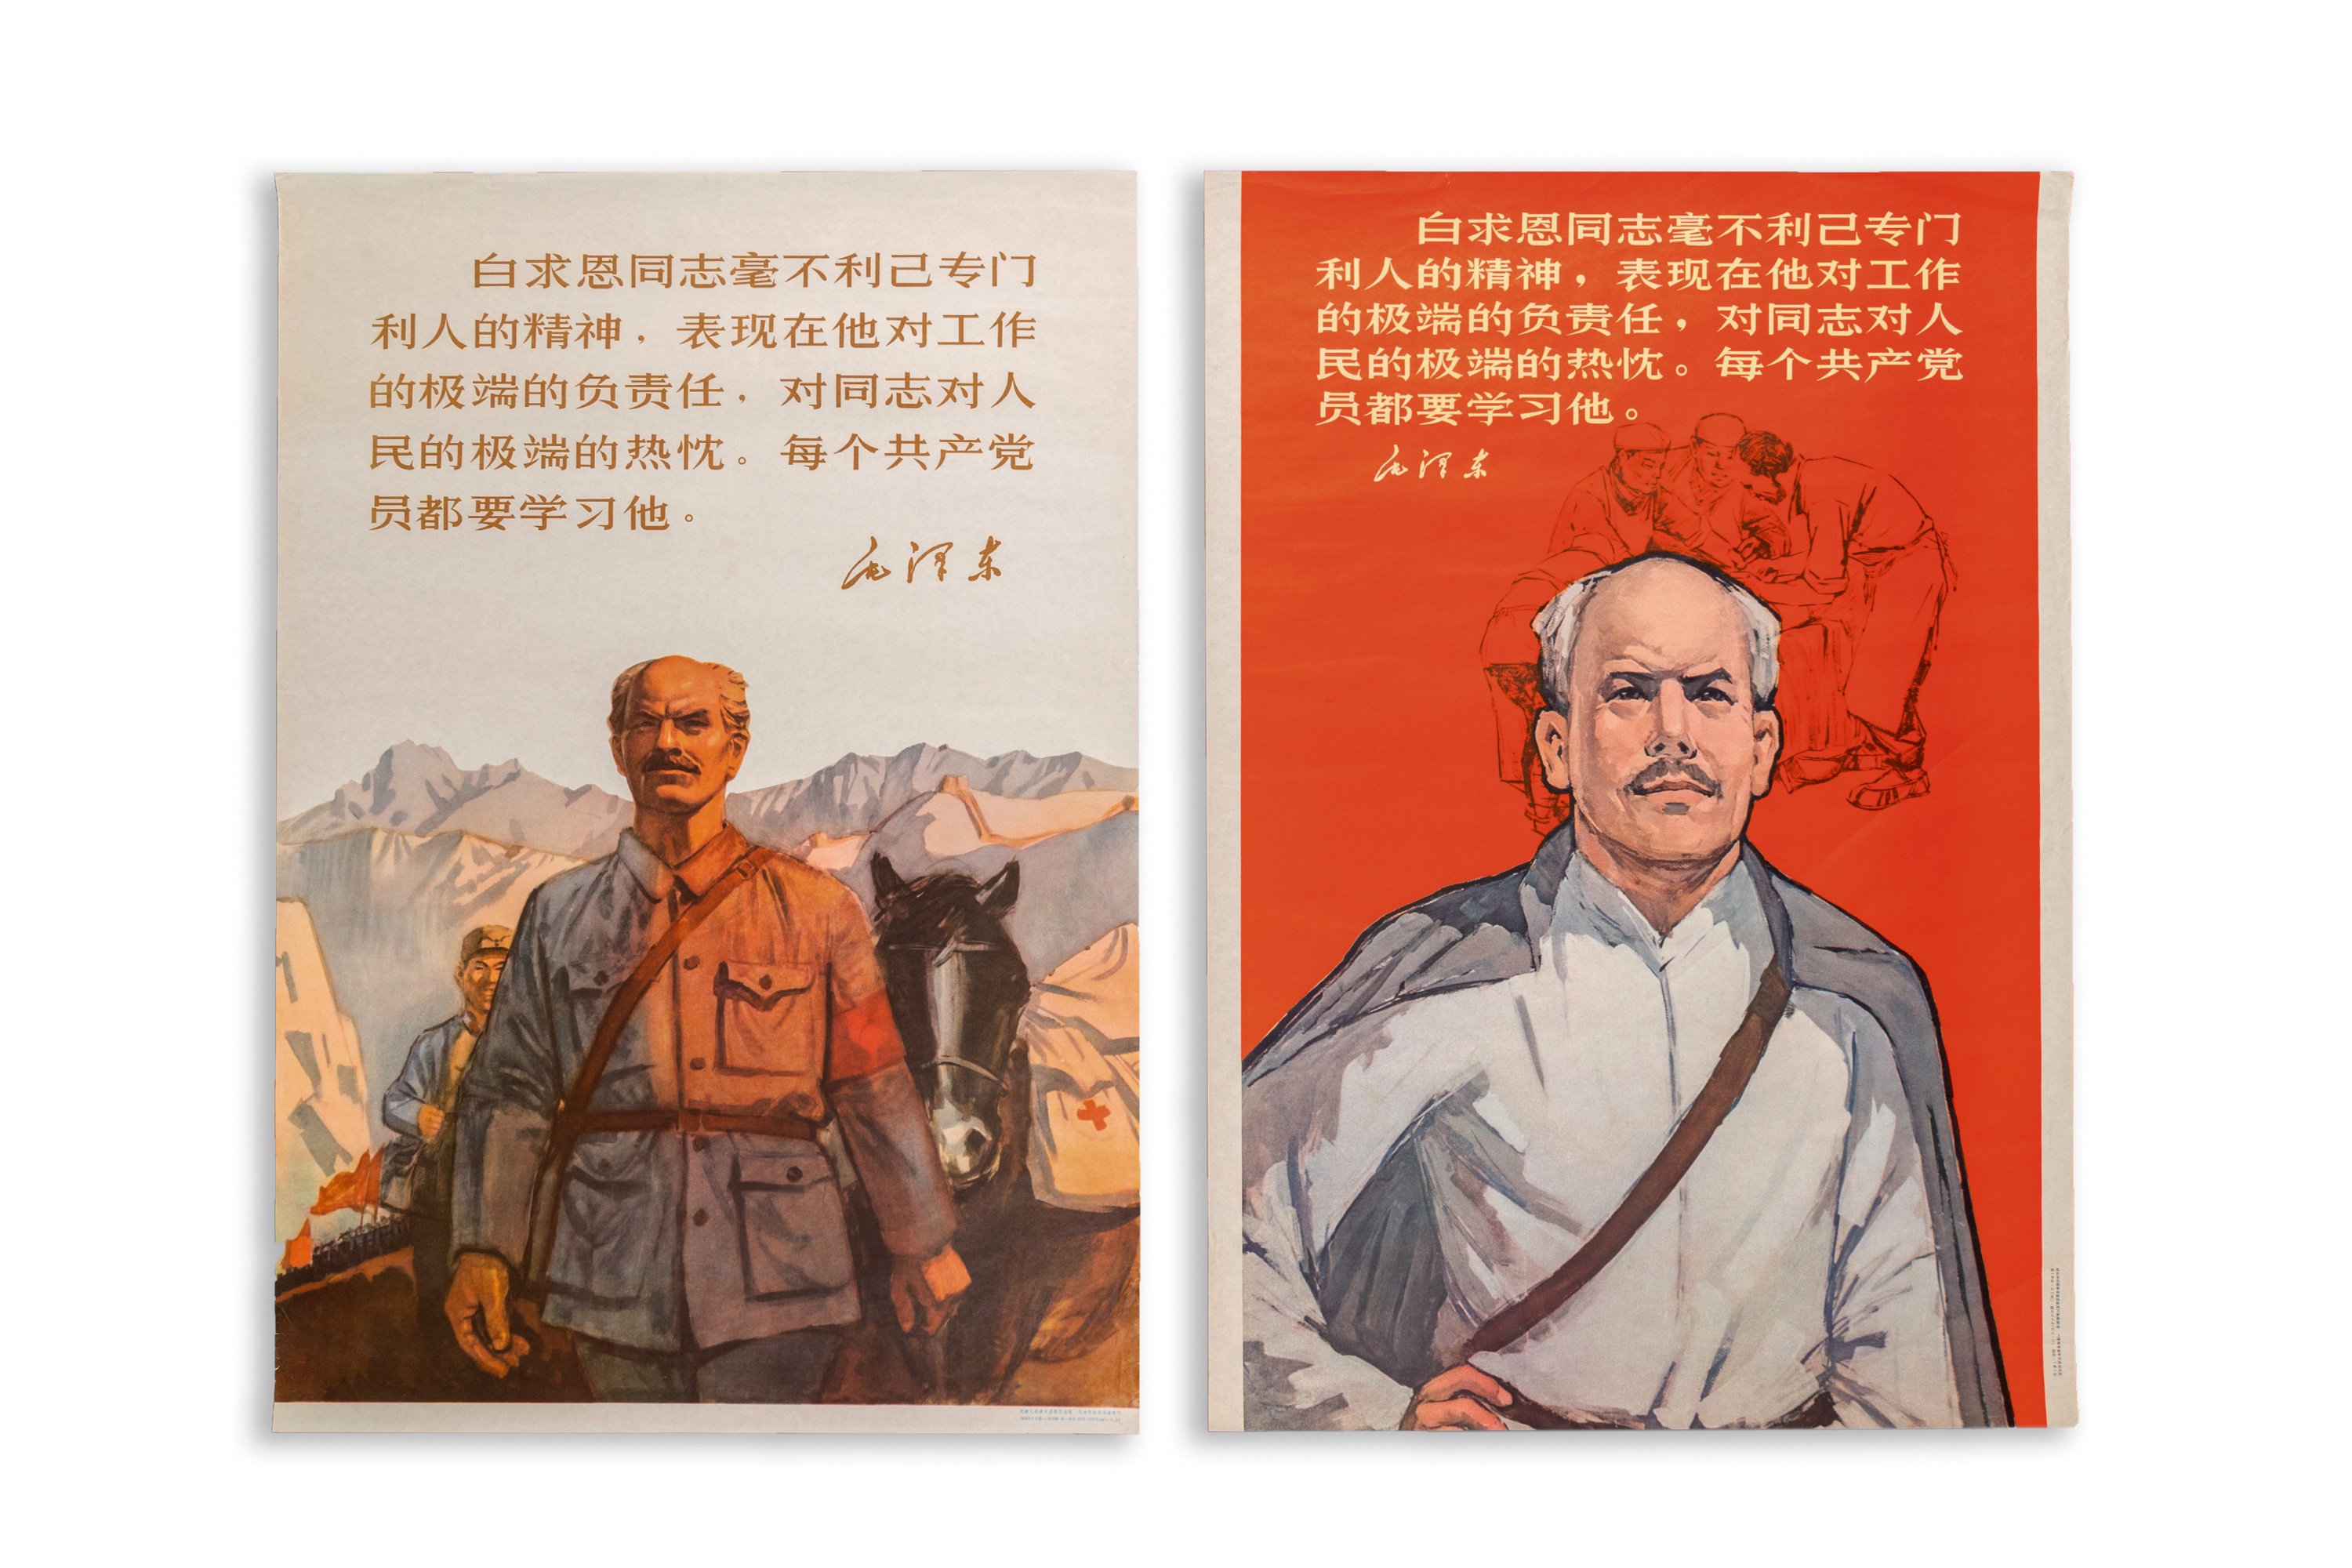 29 Chinese Cultural Revolution propaganda posters - Image 36 of 43